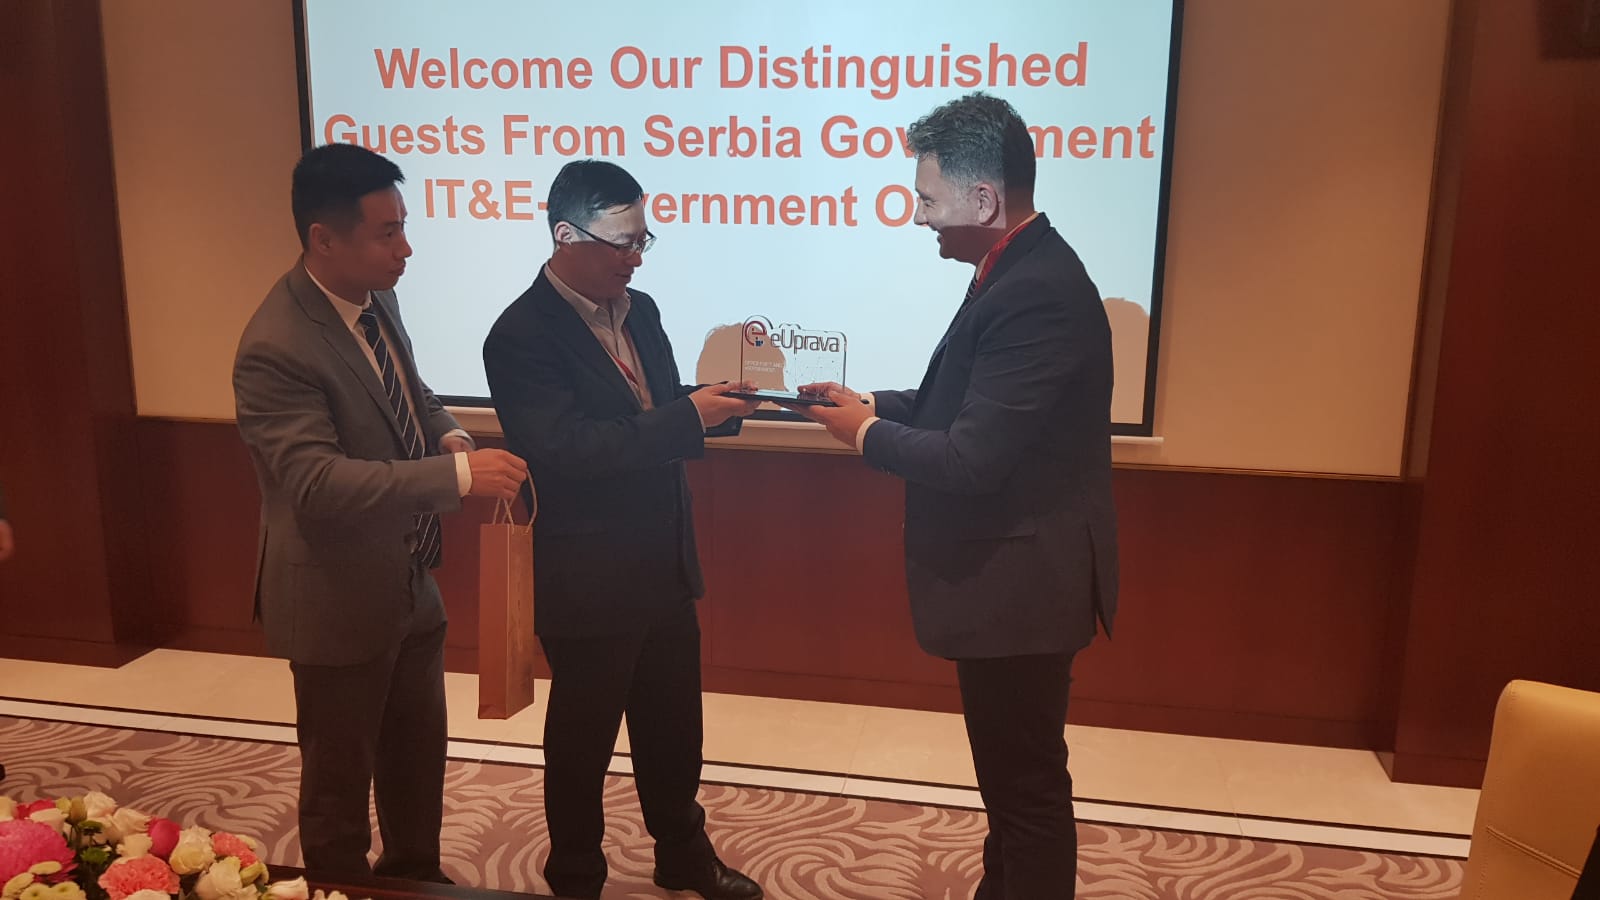 Delegation of the Office for IT and eGovernment visits Huawei - plans for the National Platform for Artificial Intelligence